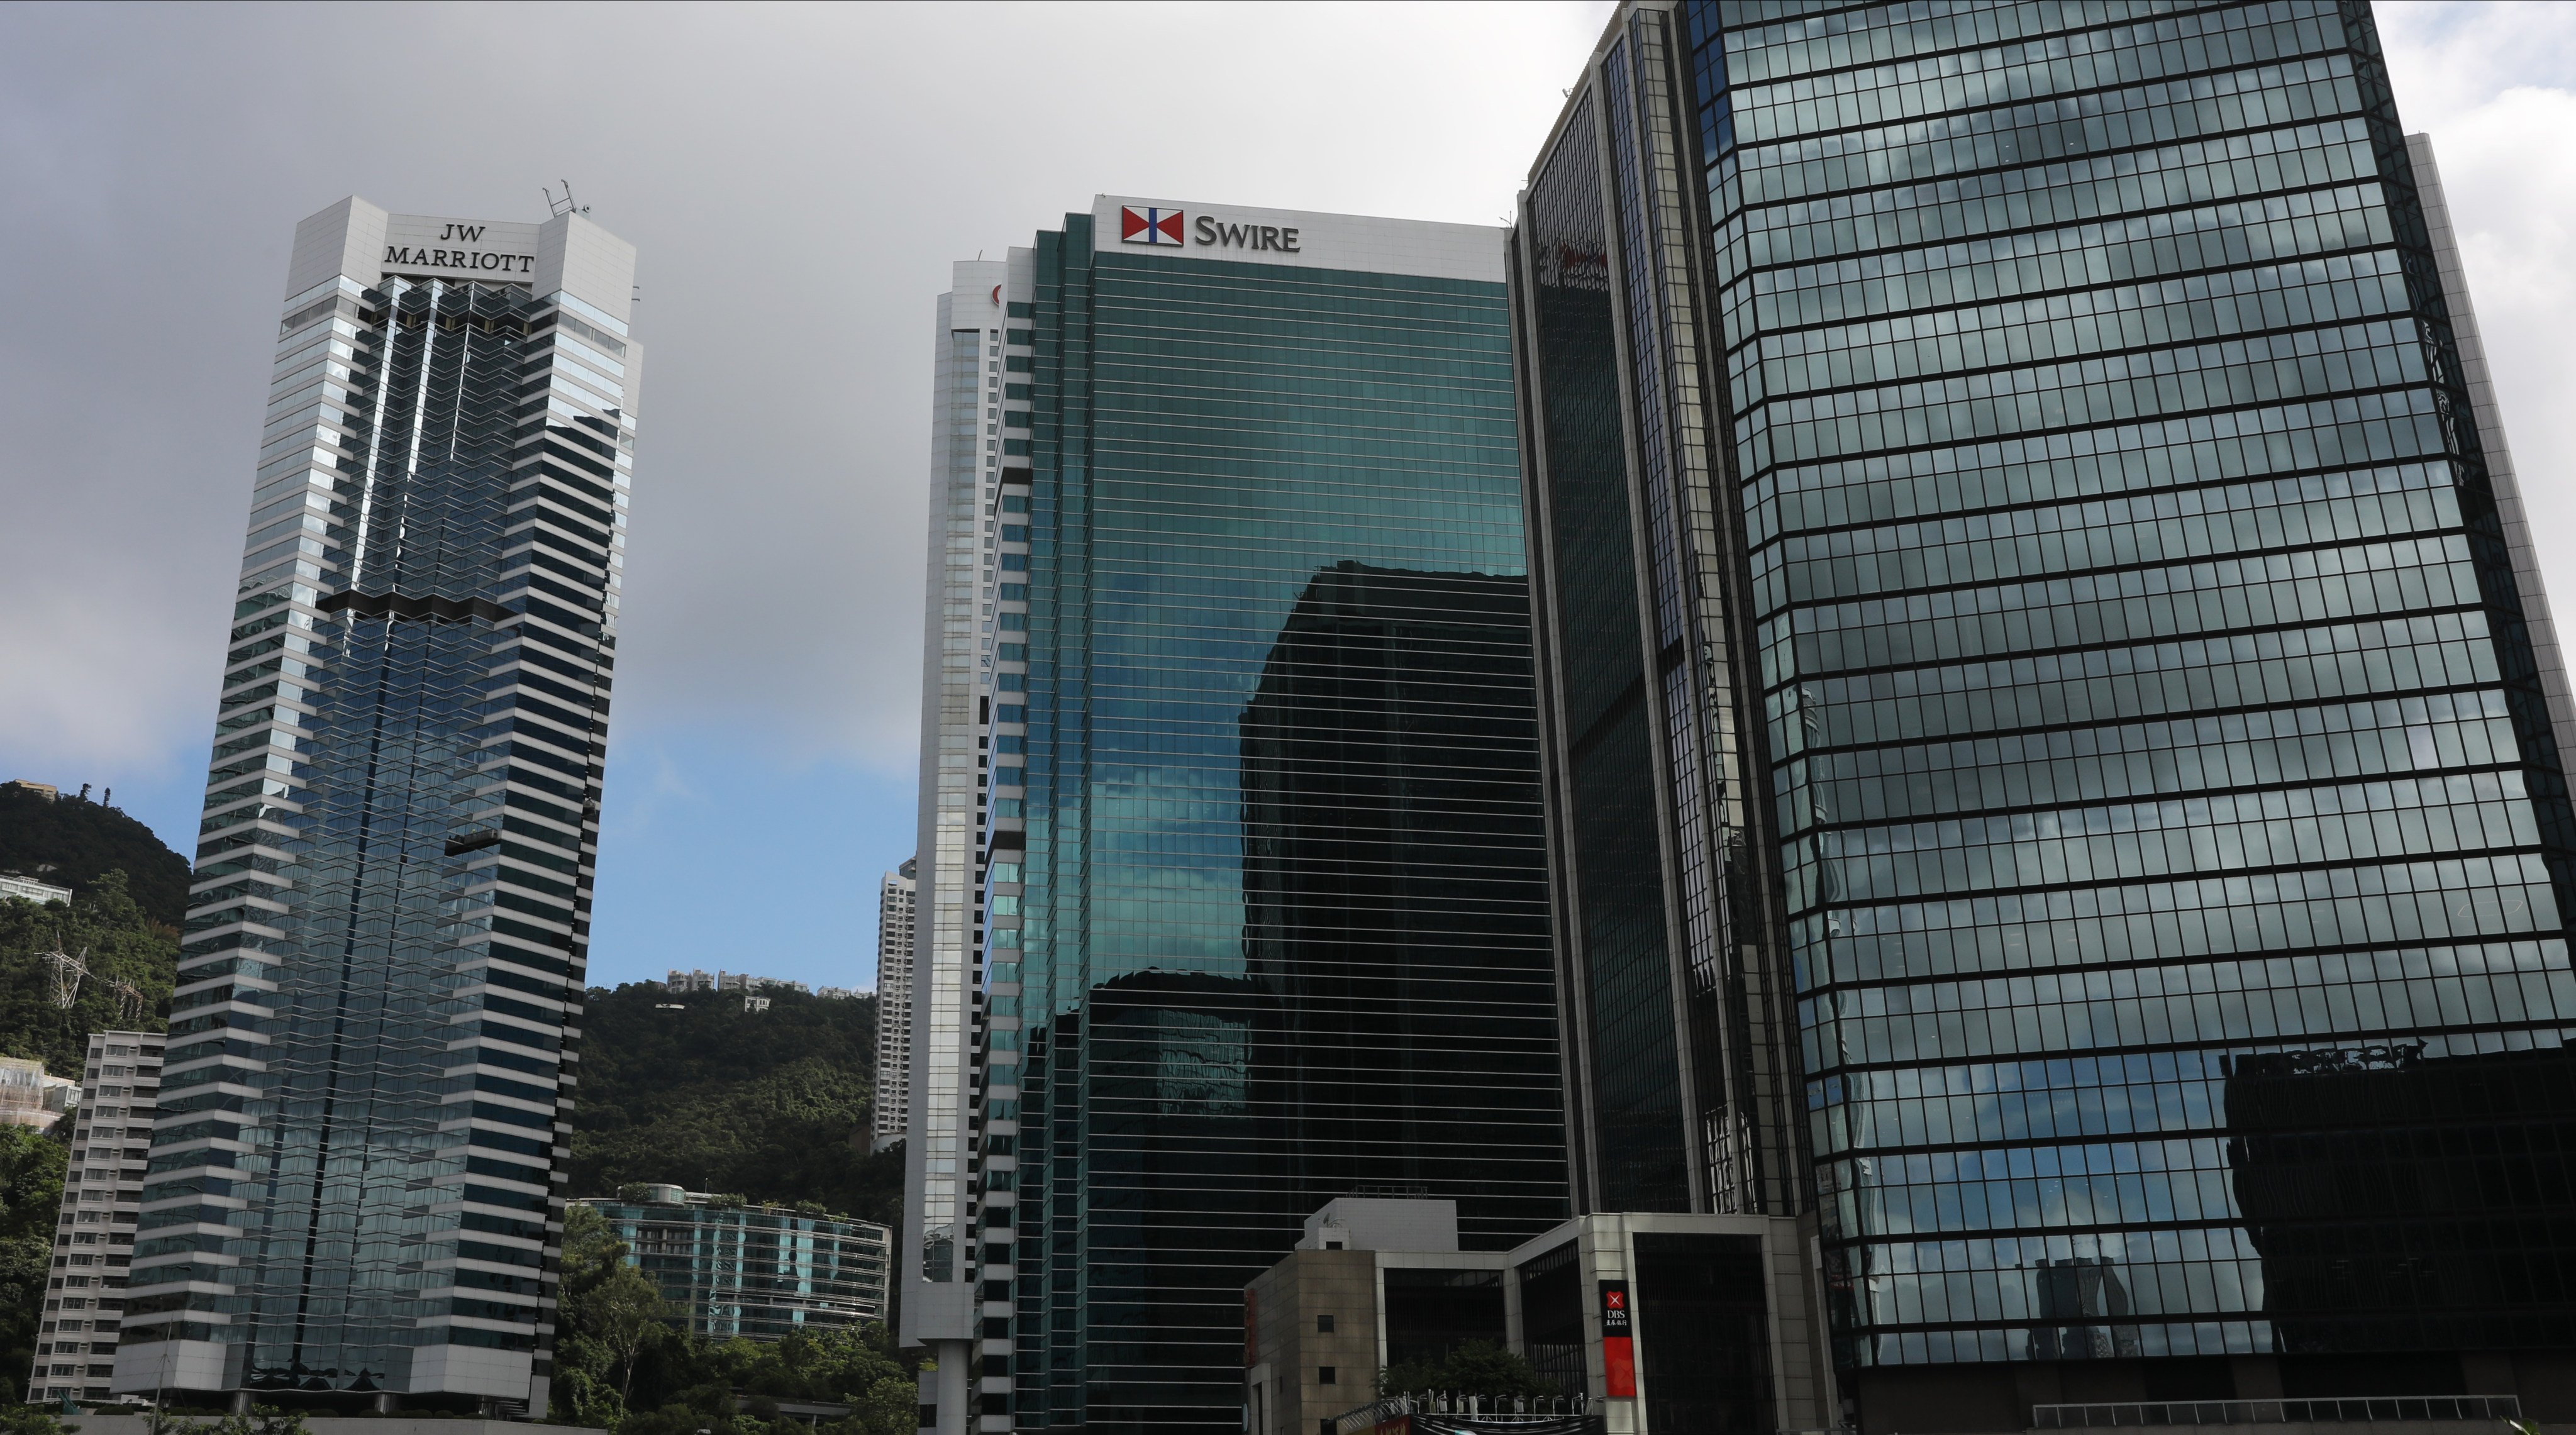 Swire’s Offices in Hong Kong’s Admiralty district, pictured in August 2020. Photo: SCMP / K. Y. Cheng